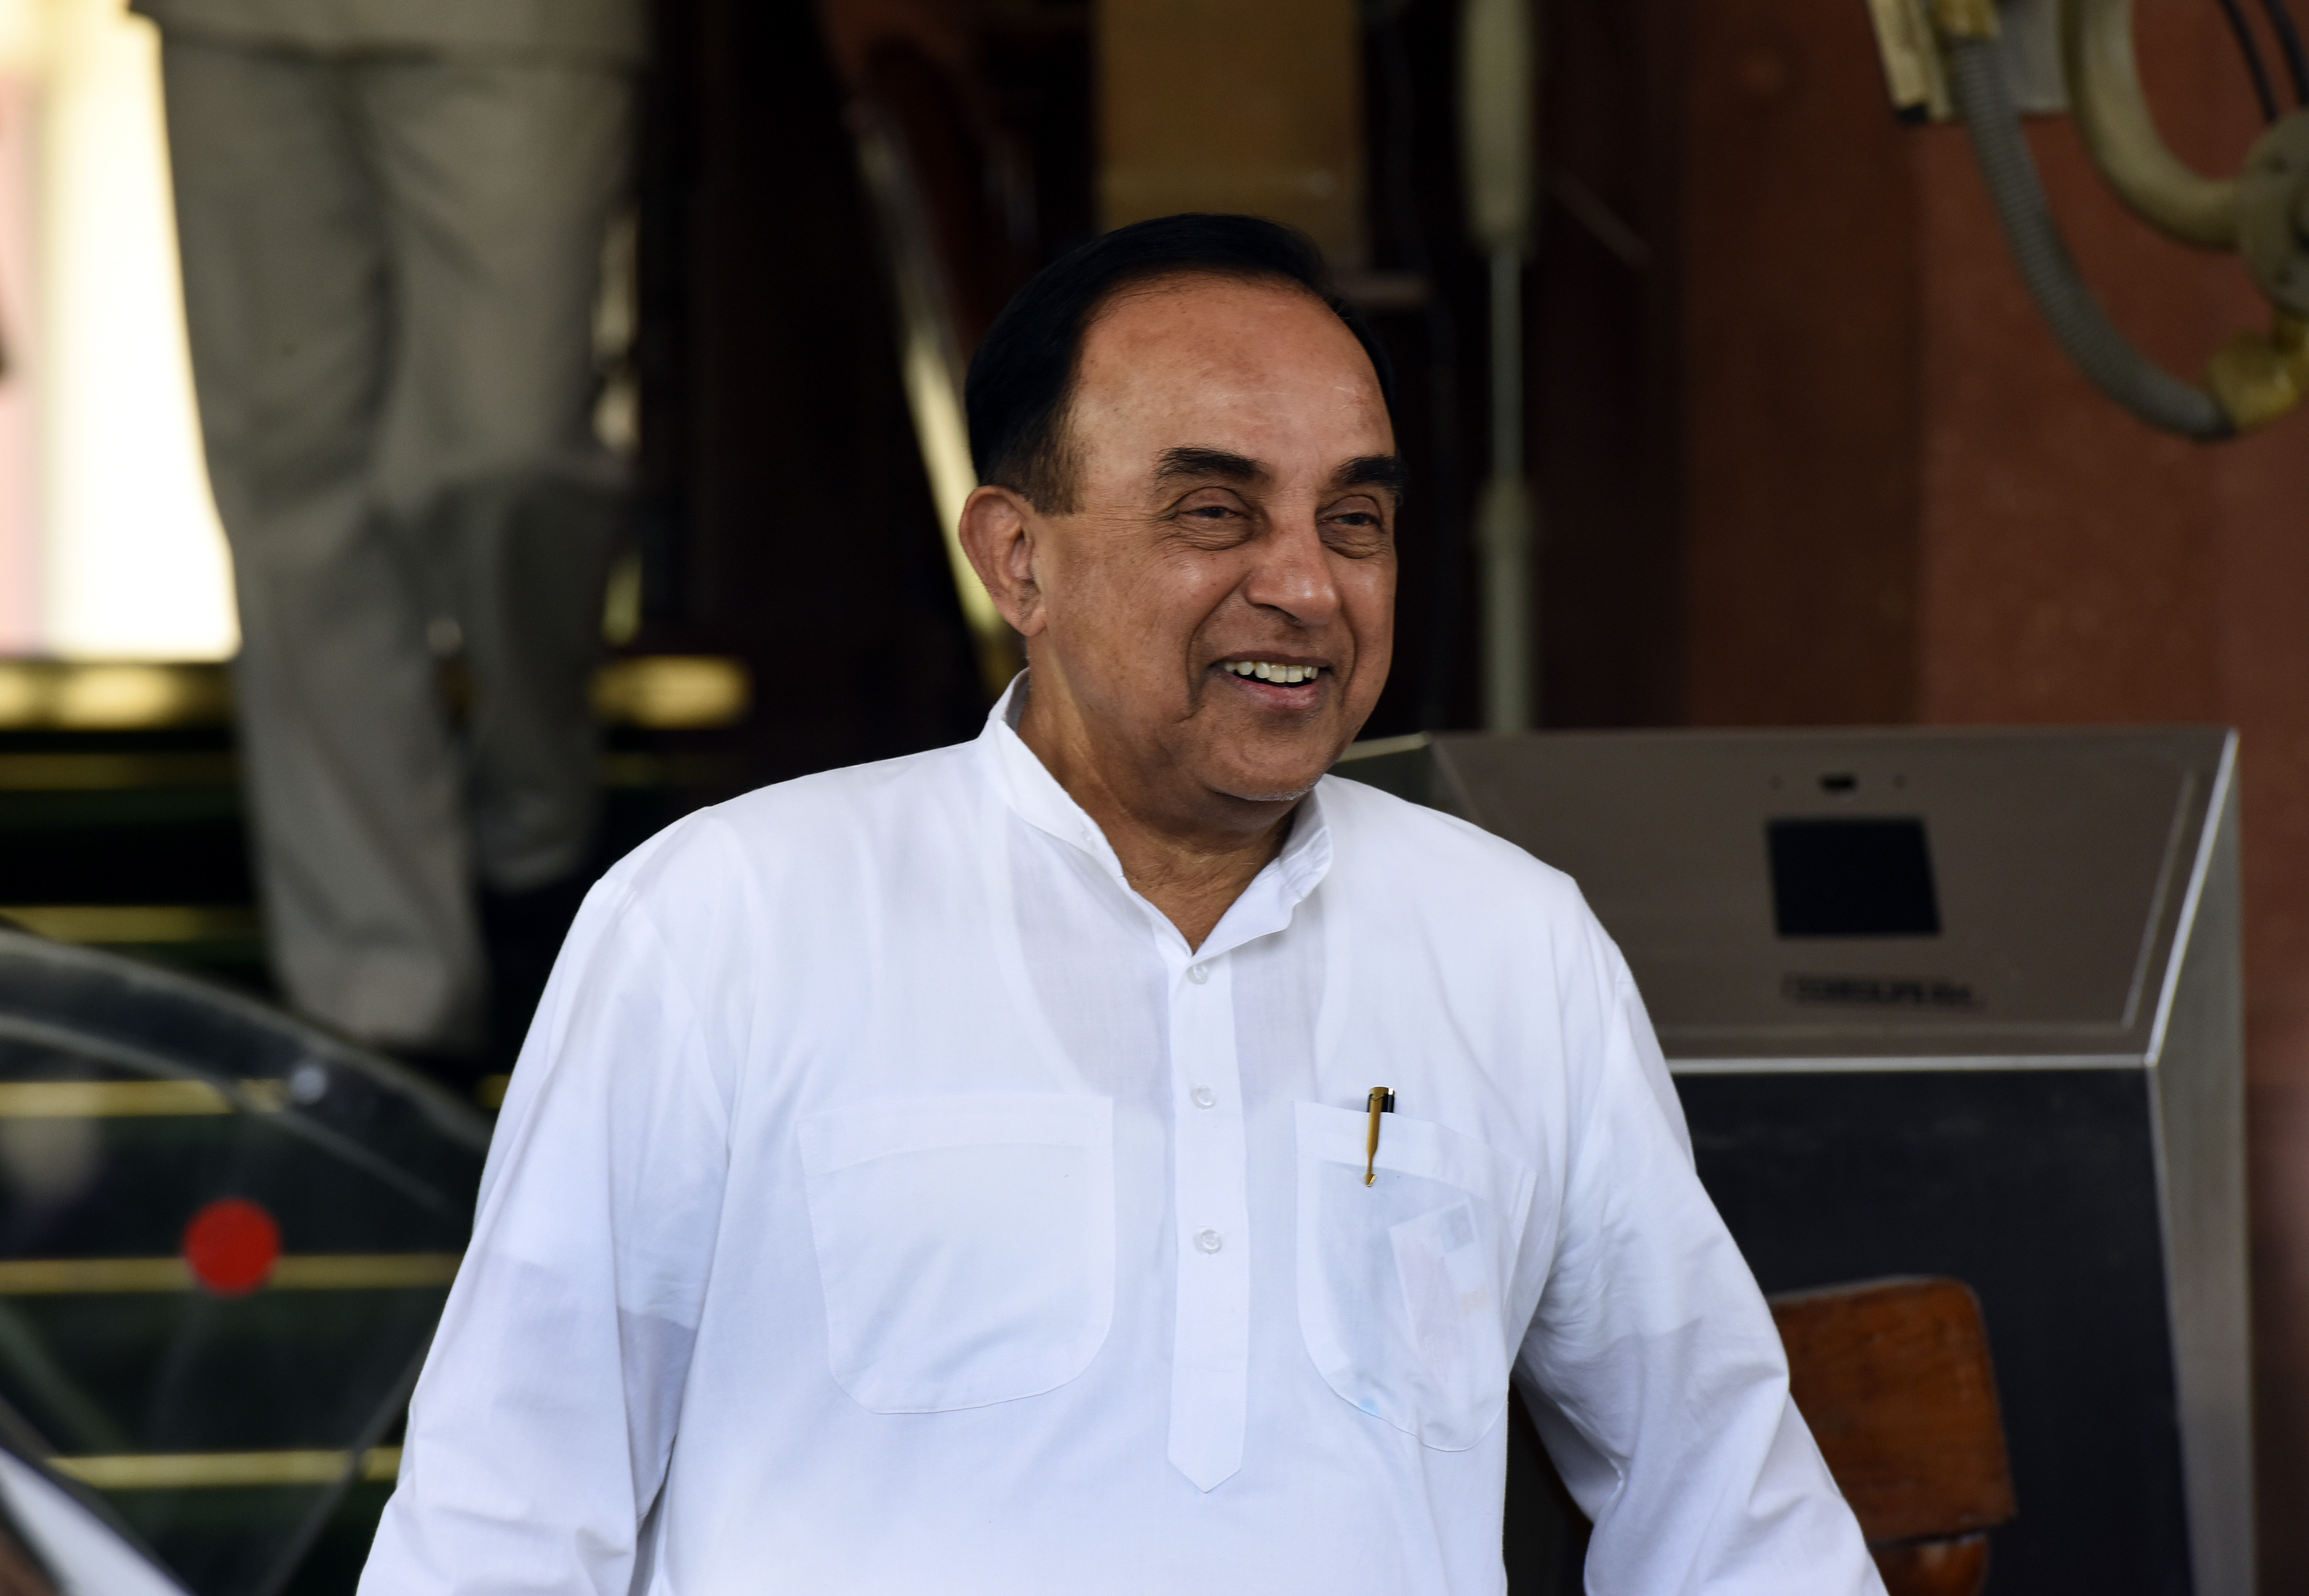 Fans Might Be Thrilled, But Subramanian Swamy Is Not Helping BJP's Cause